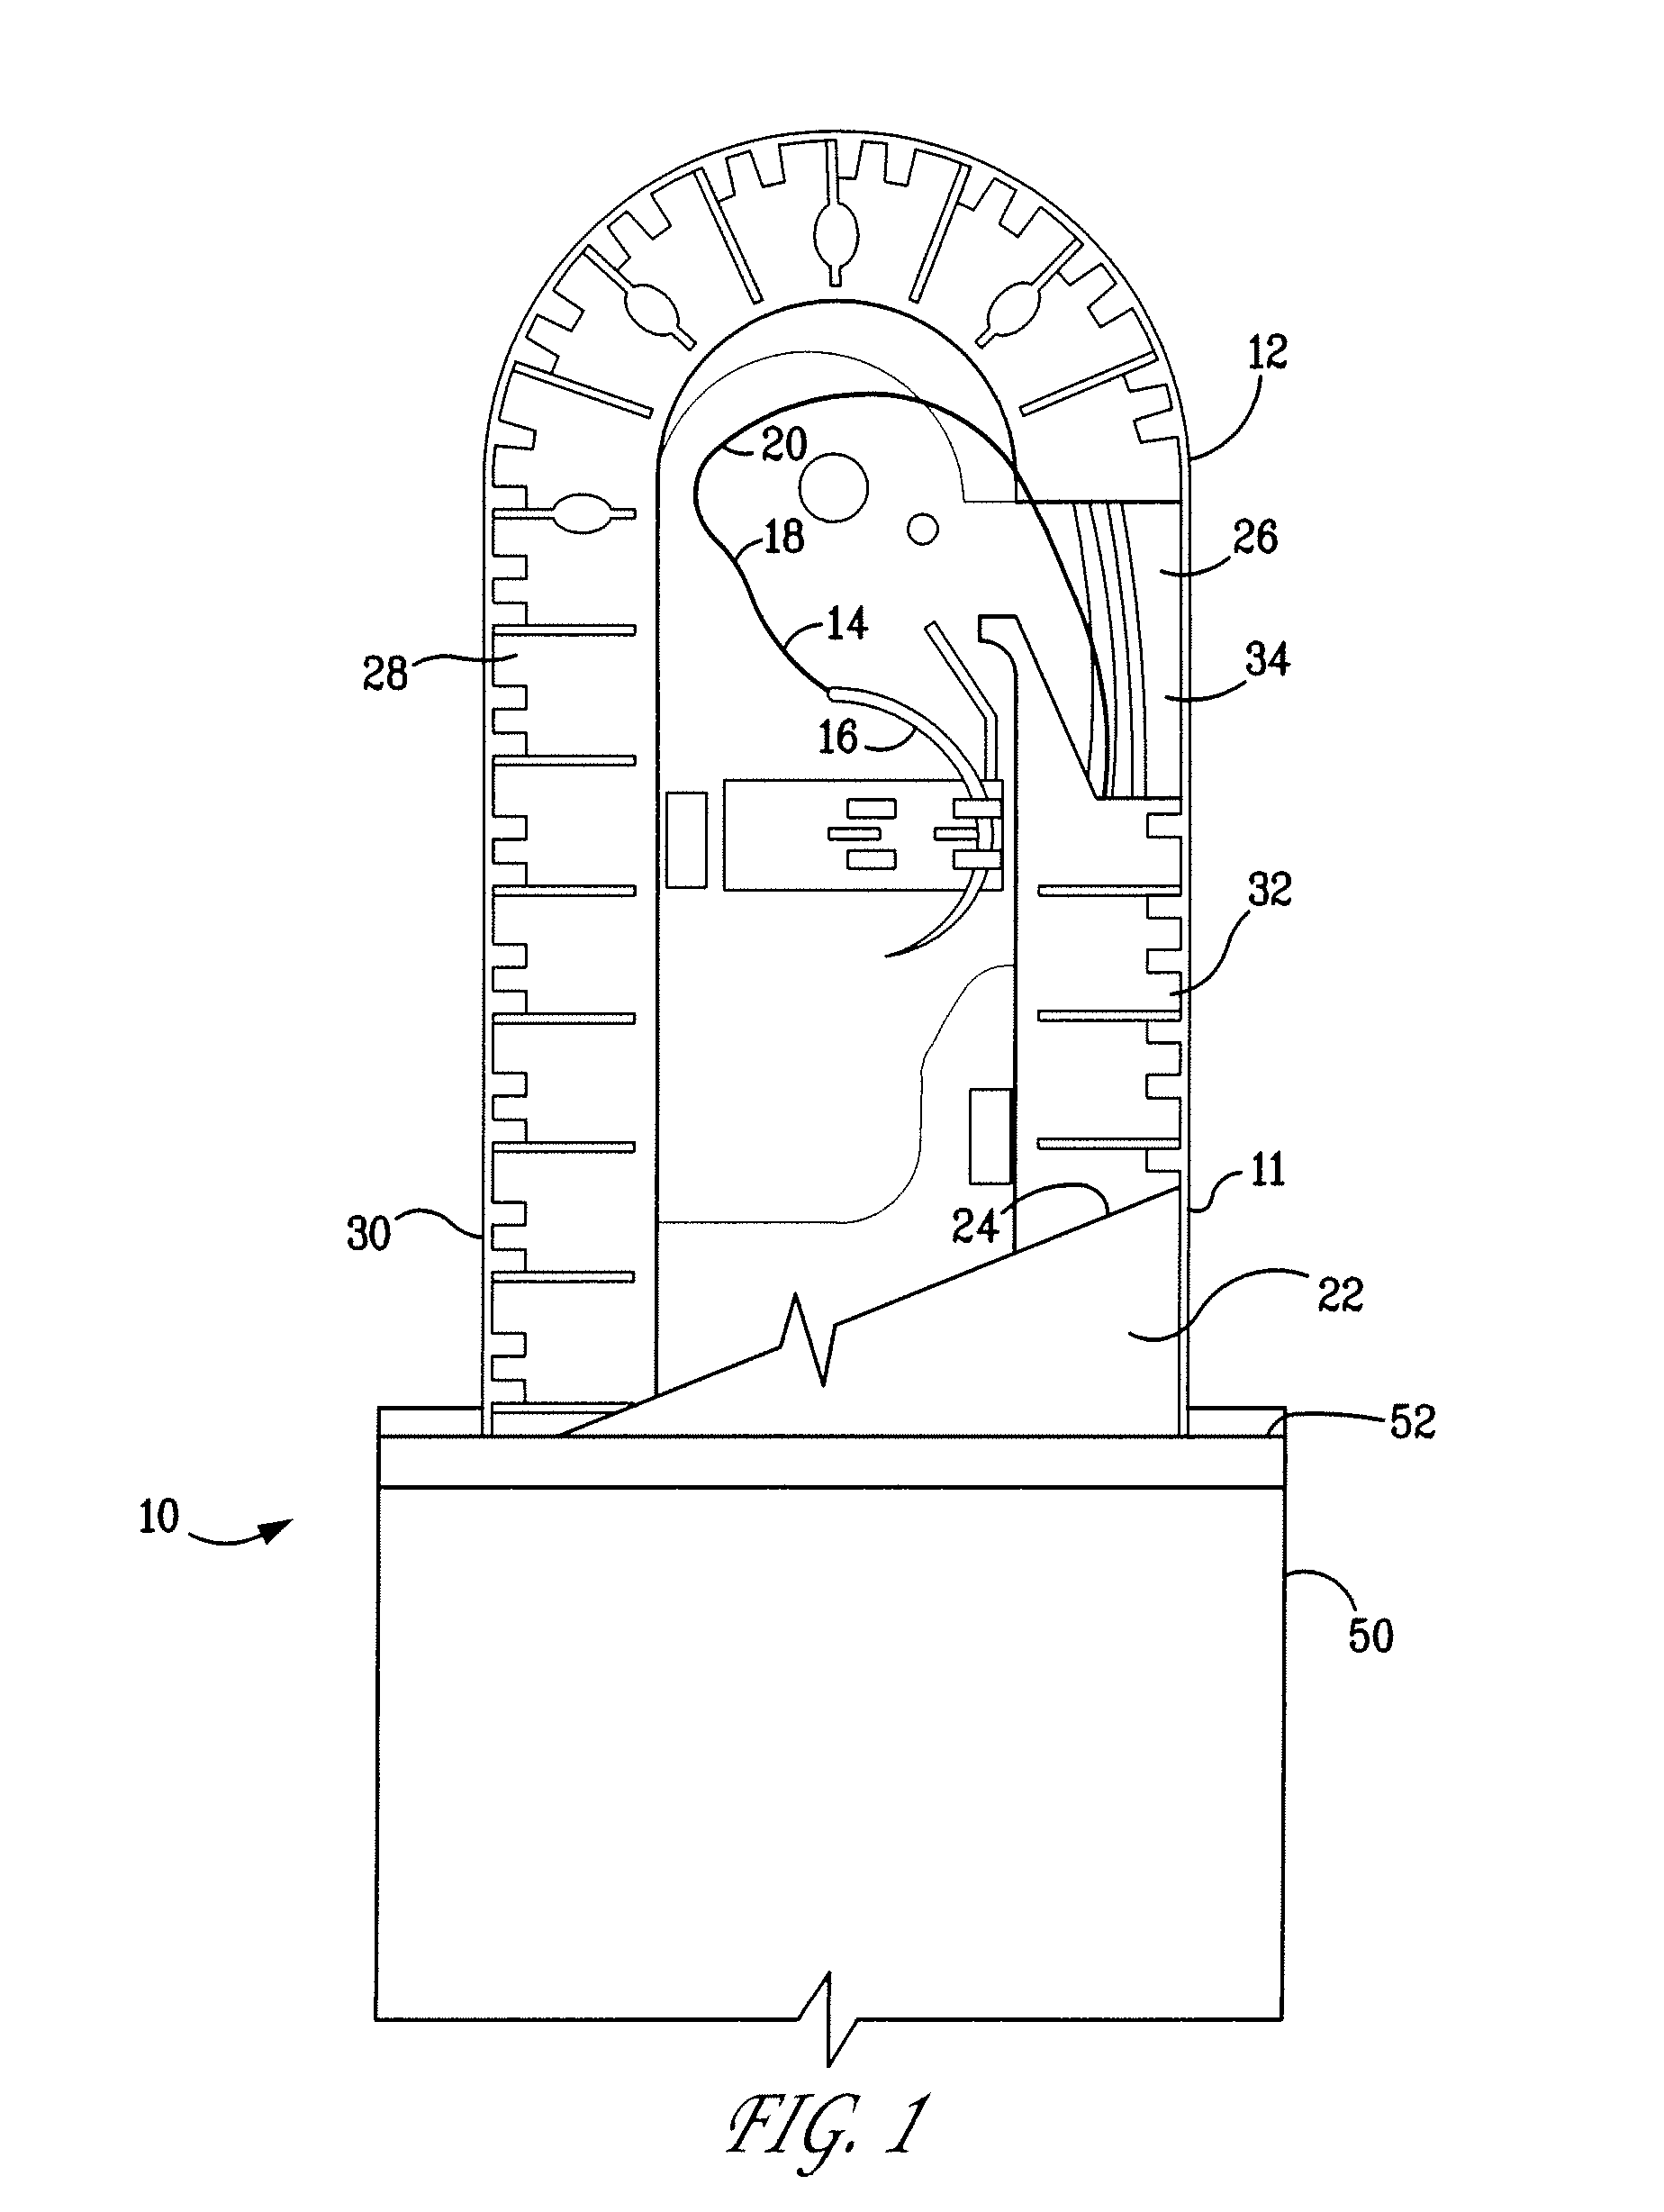 Packaged antimicrobial medical device having improved shelf life and method of preparing same